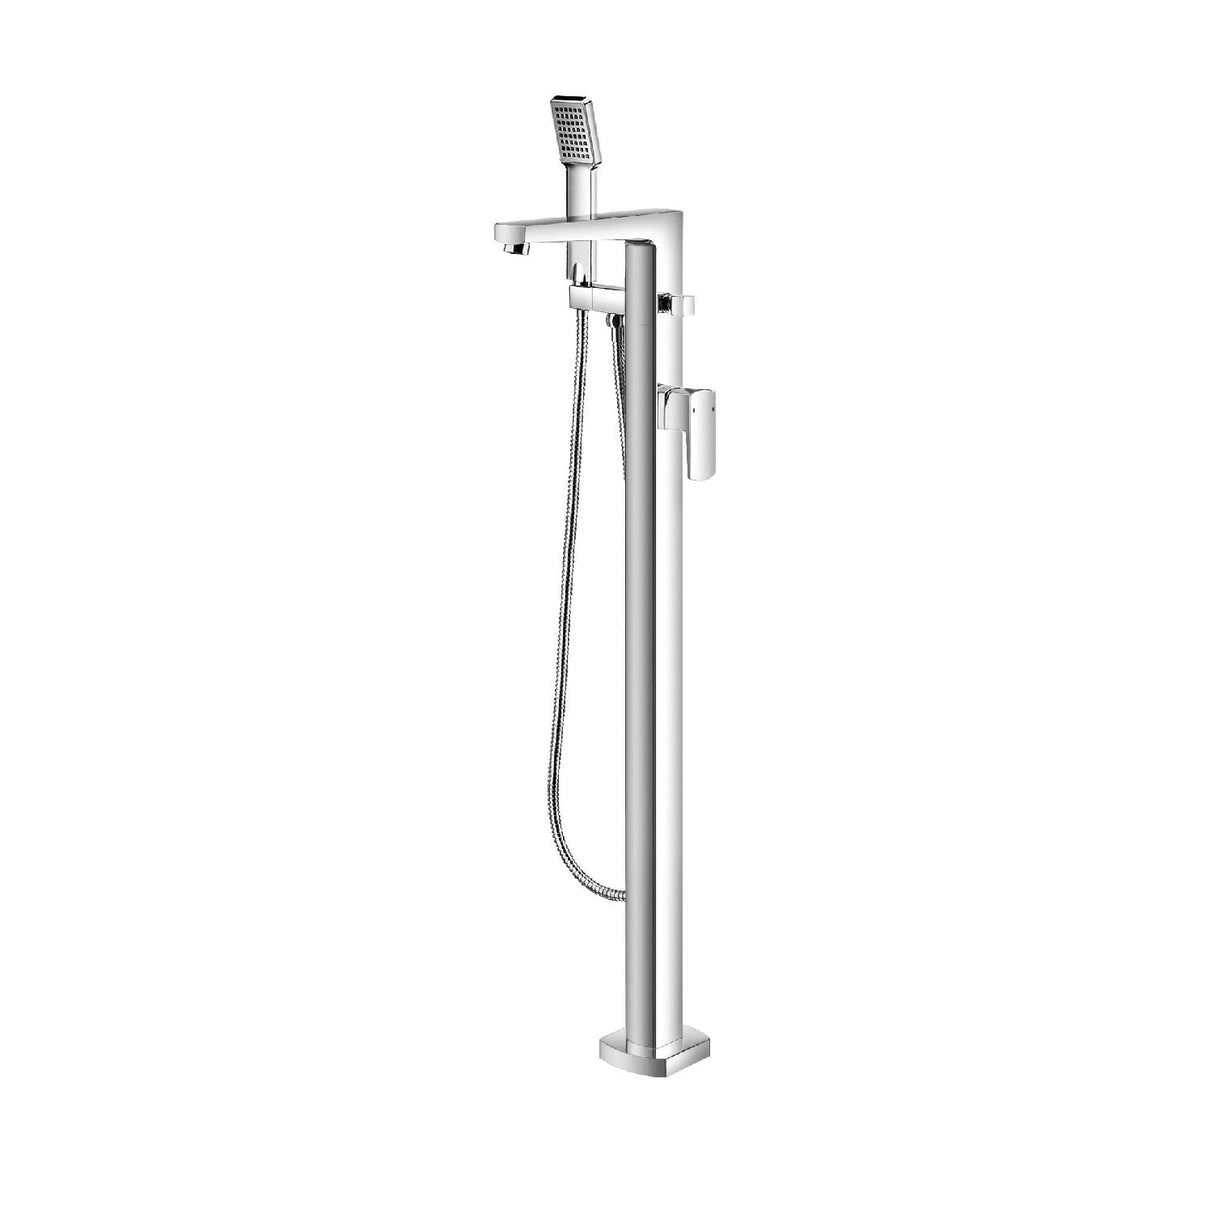 DAX Brass Freestanding Tub Filler with Hand Shower and Square Spout, Chrome DAX-8129